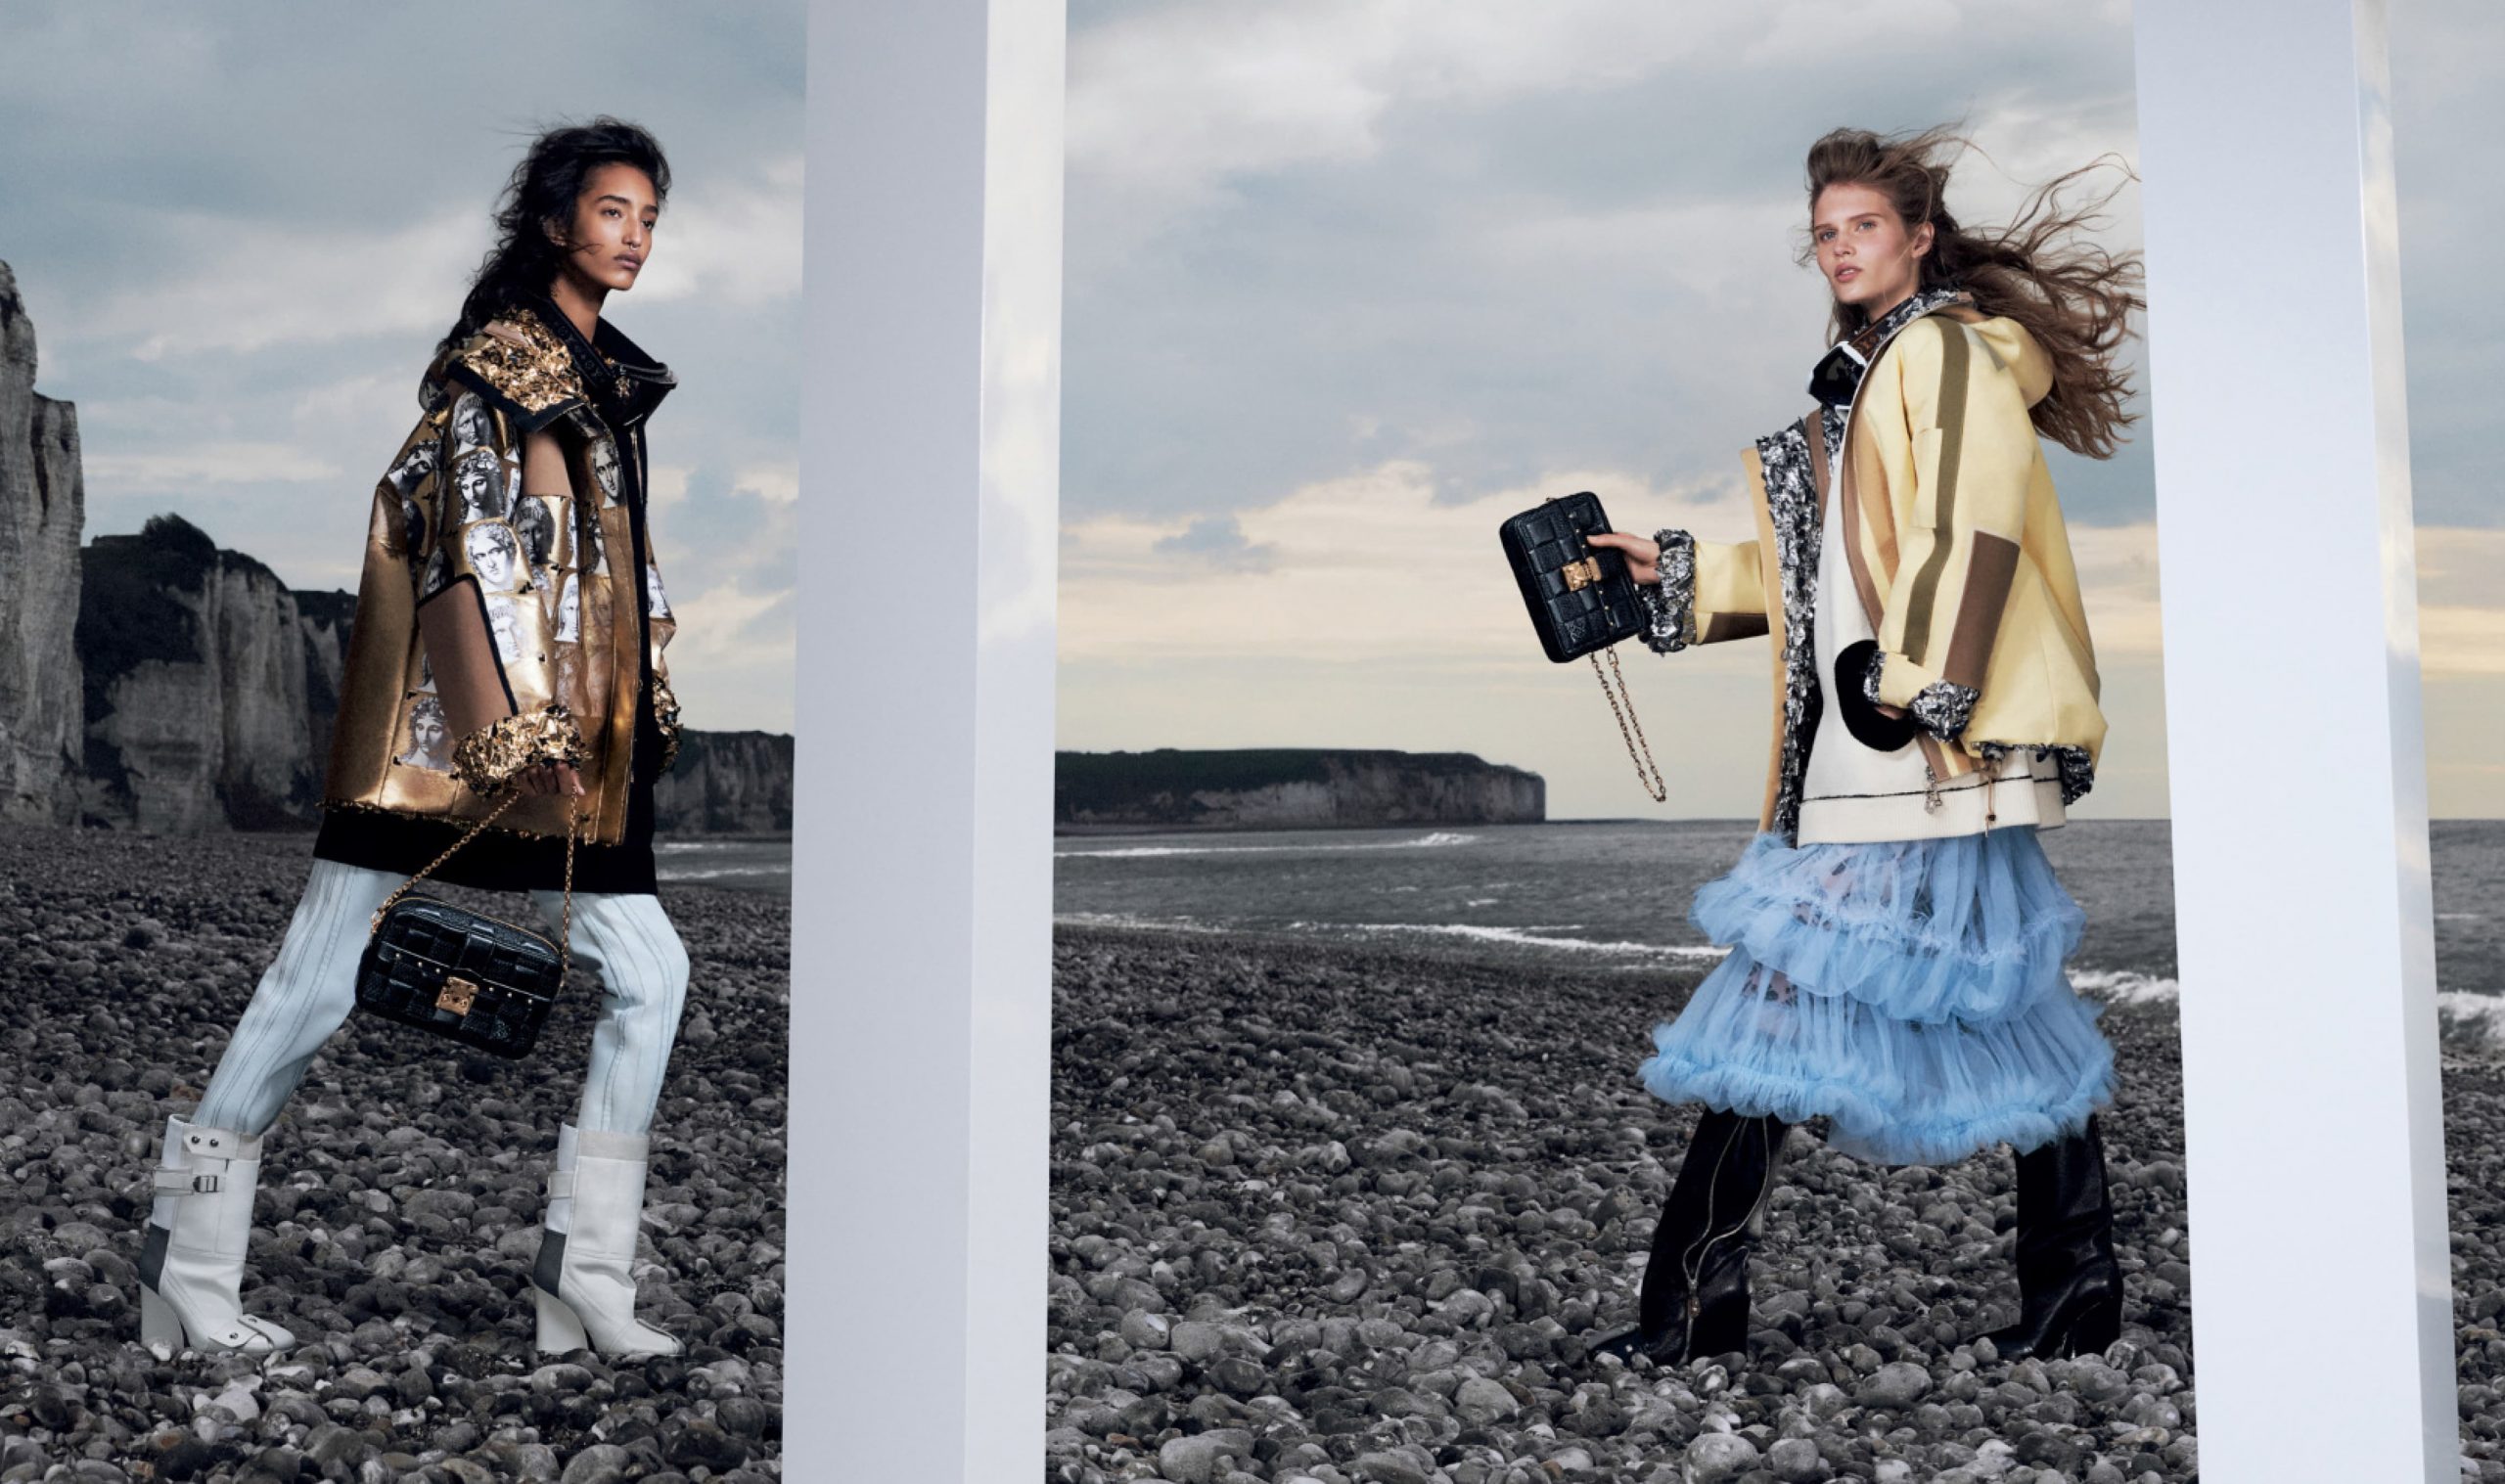 Louis Vuitton Fall 2020 Ad Campaign - theFashionSpot